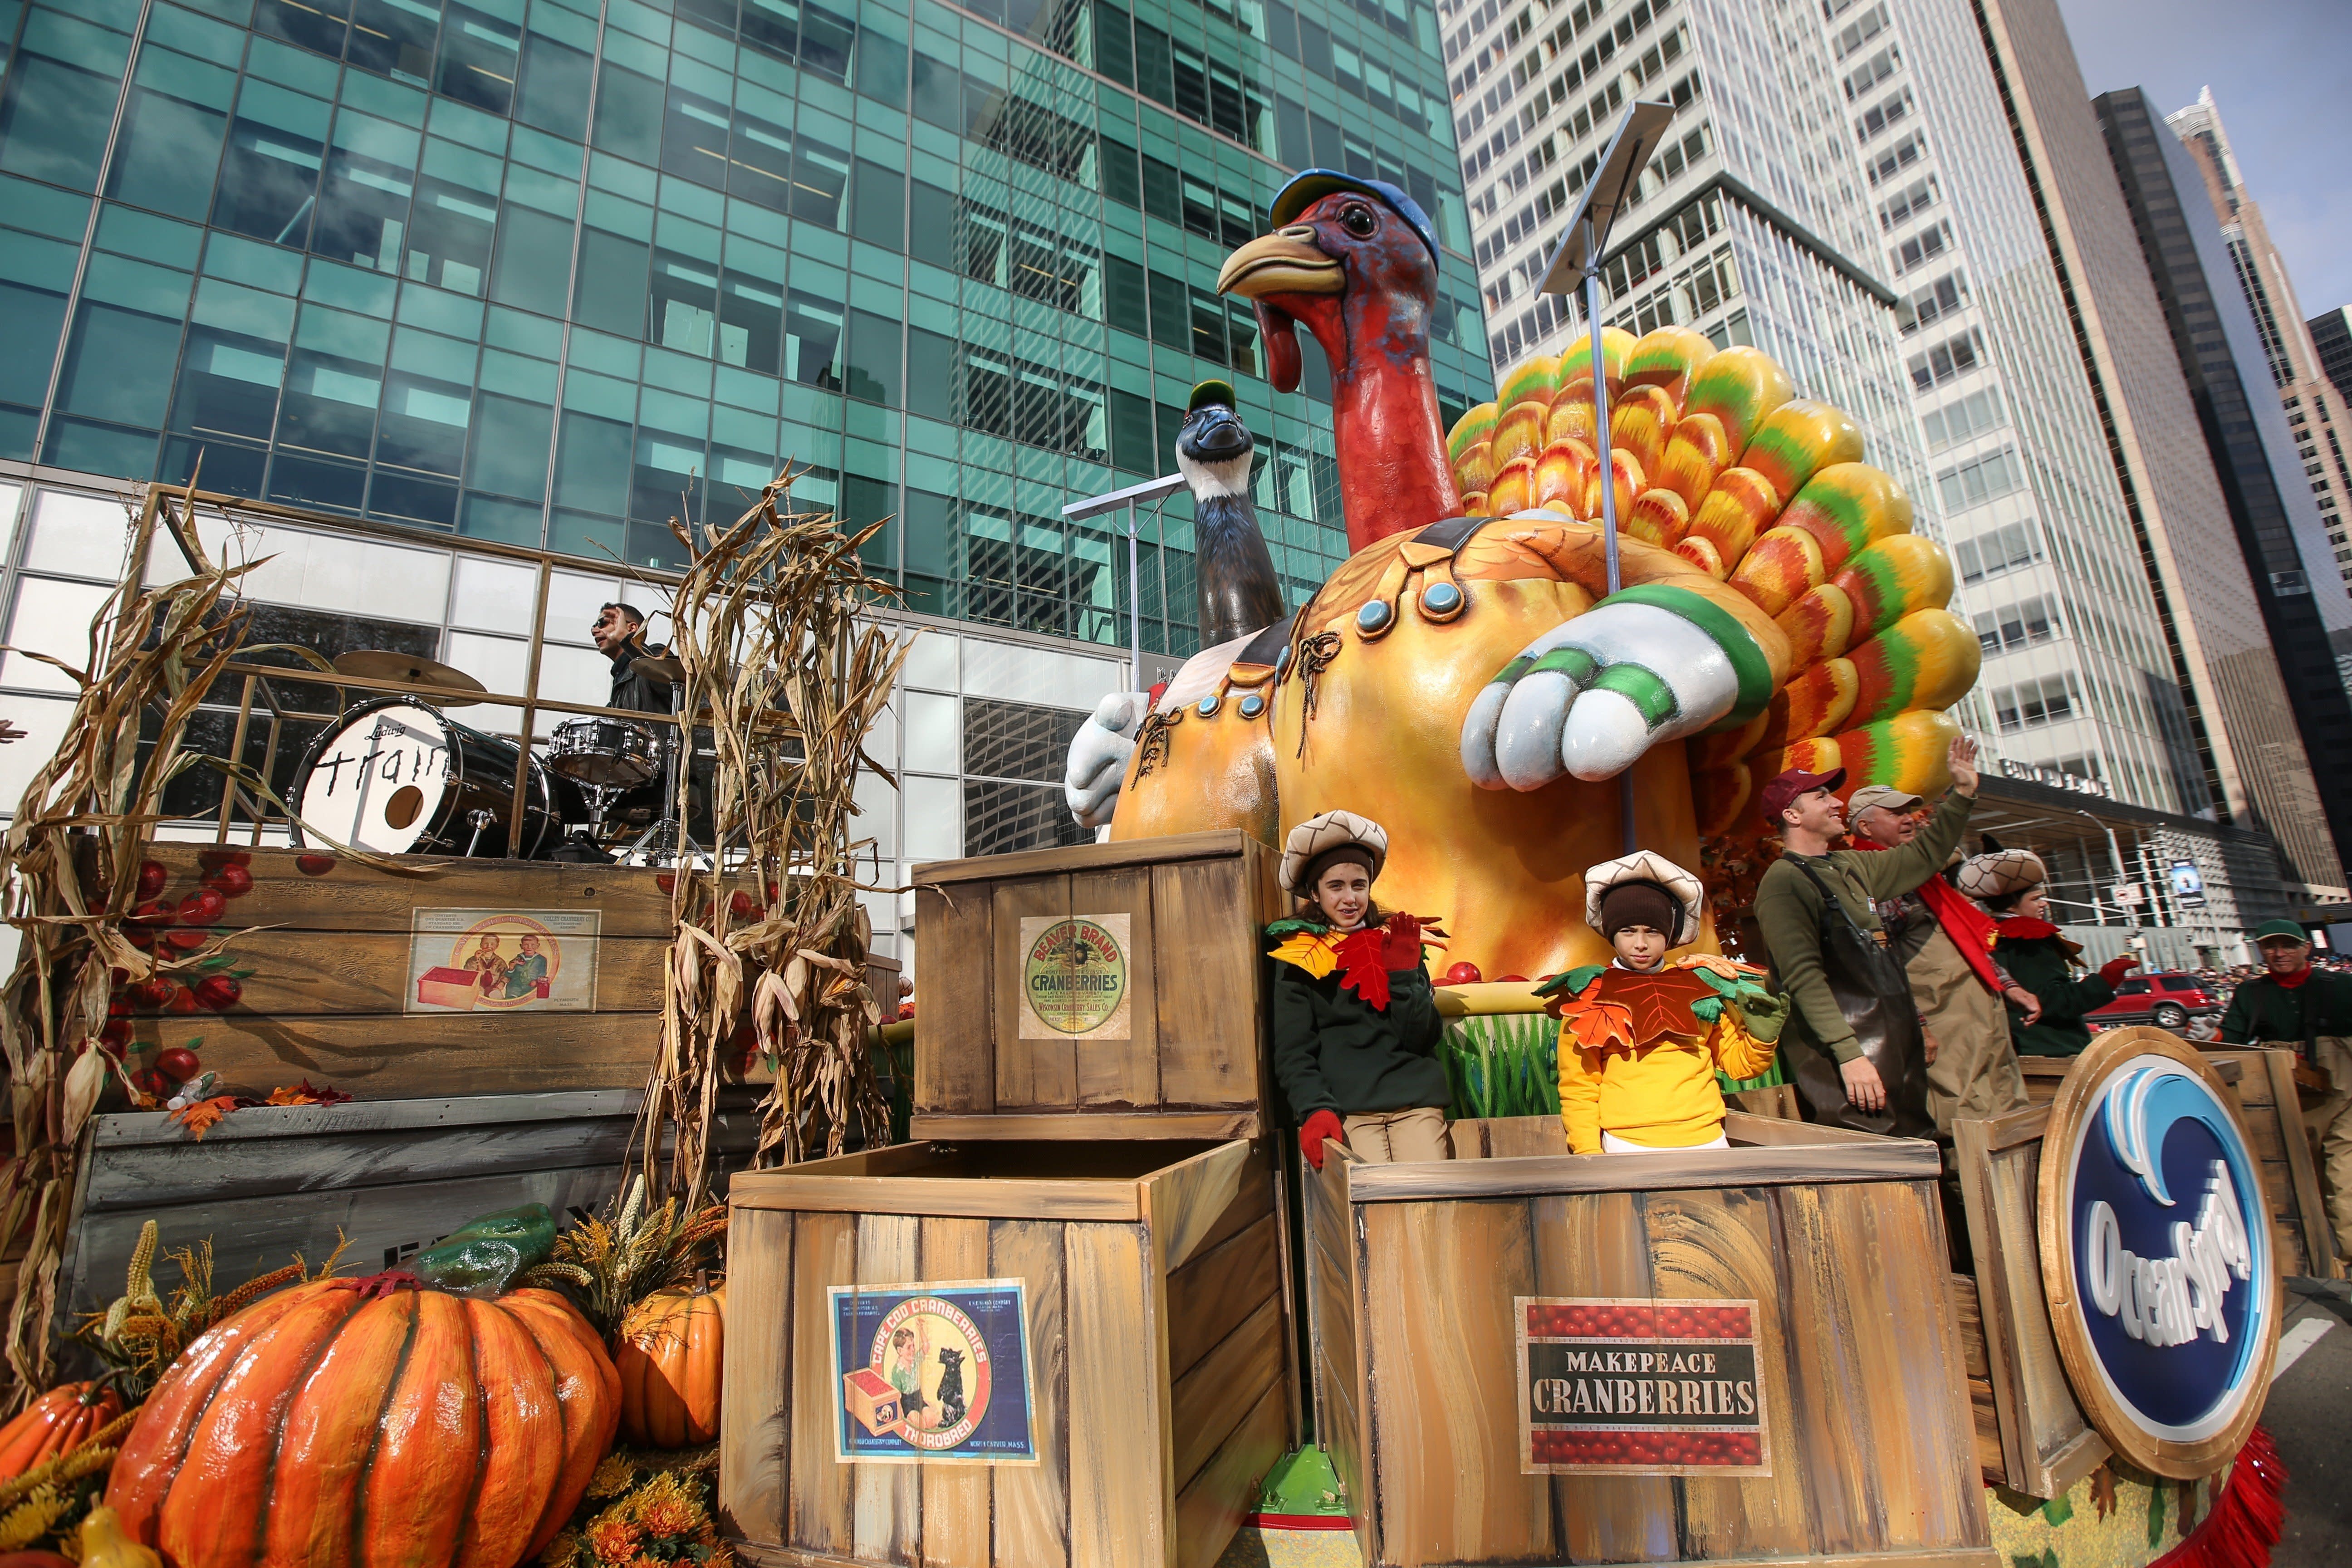 Watch Live Macy’s Thanksgiving Day Parade in 360Degree Video